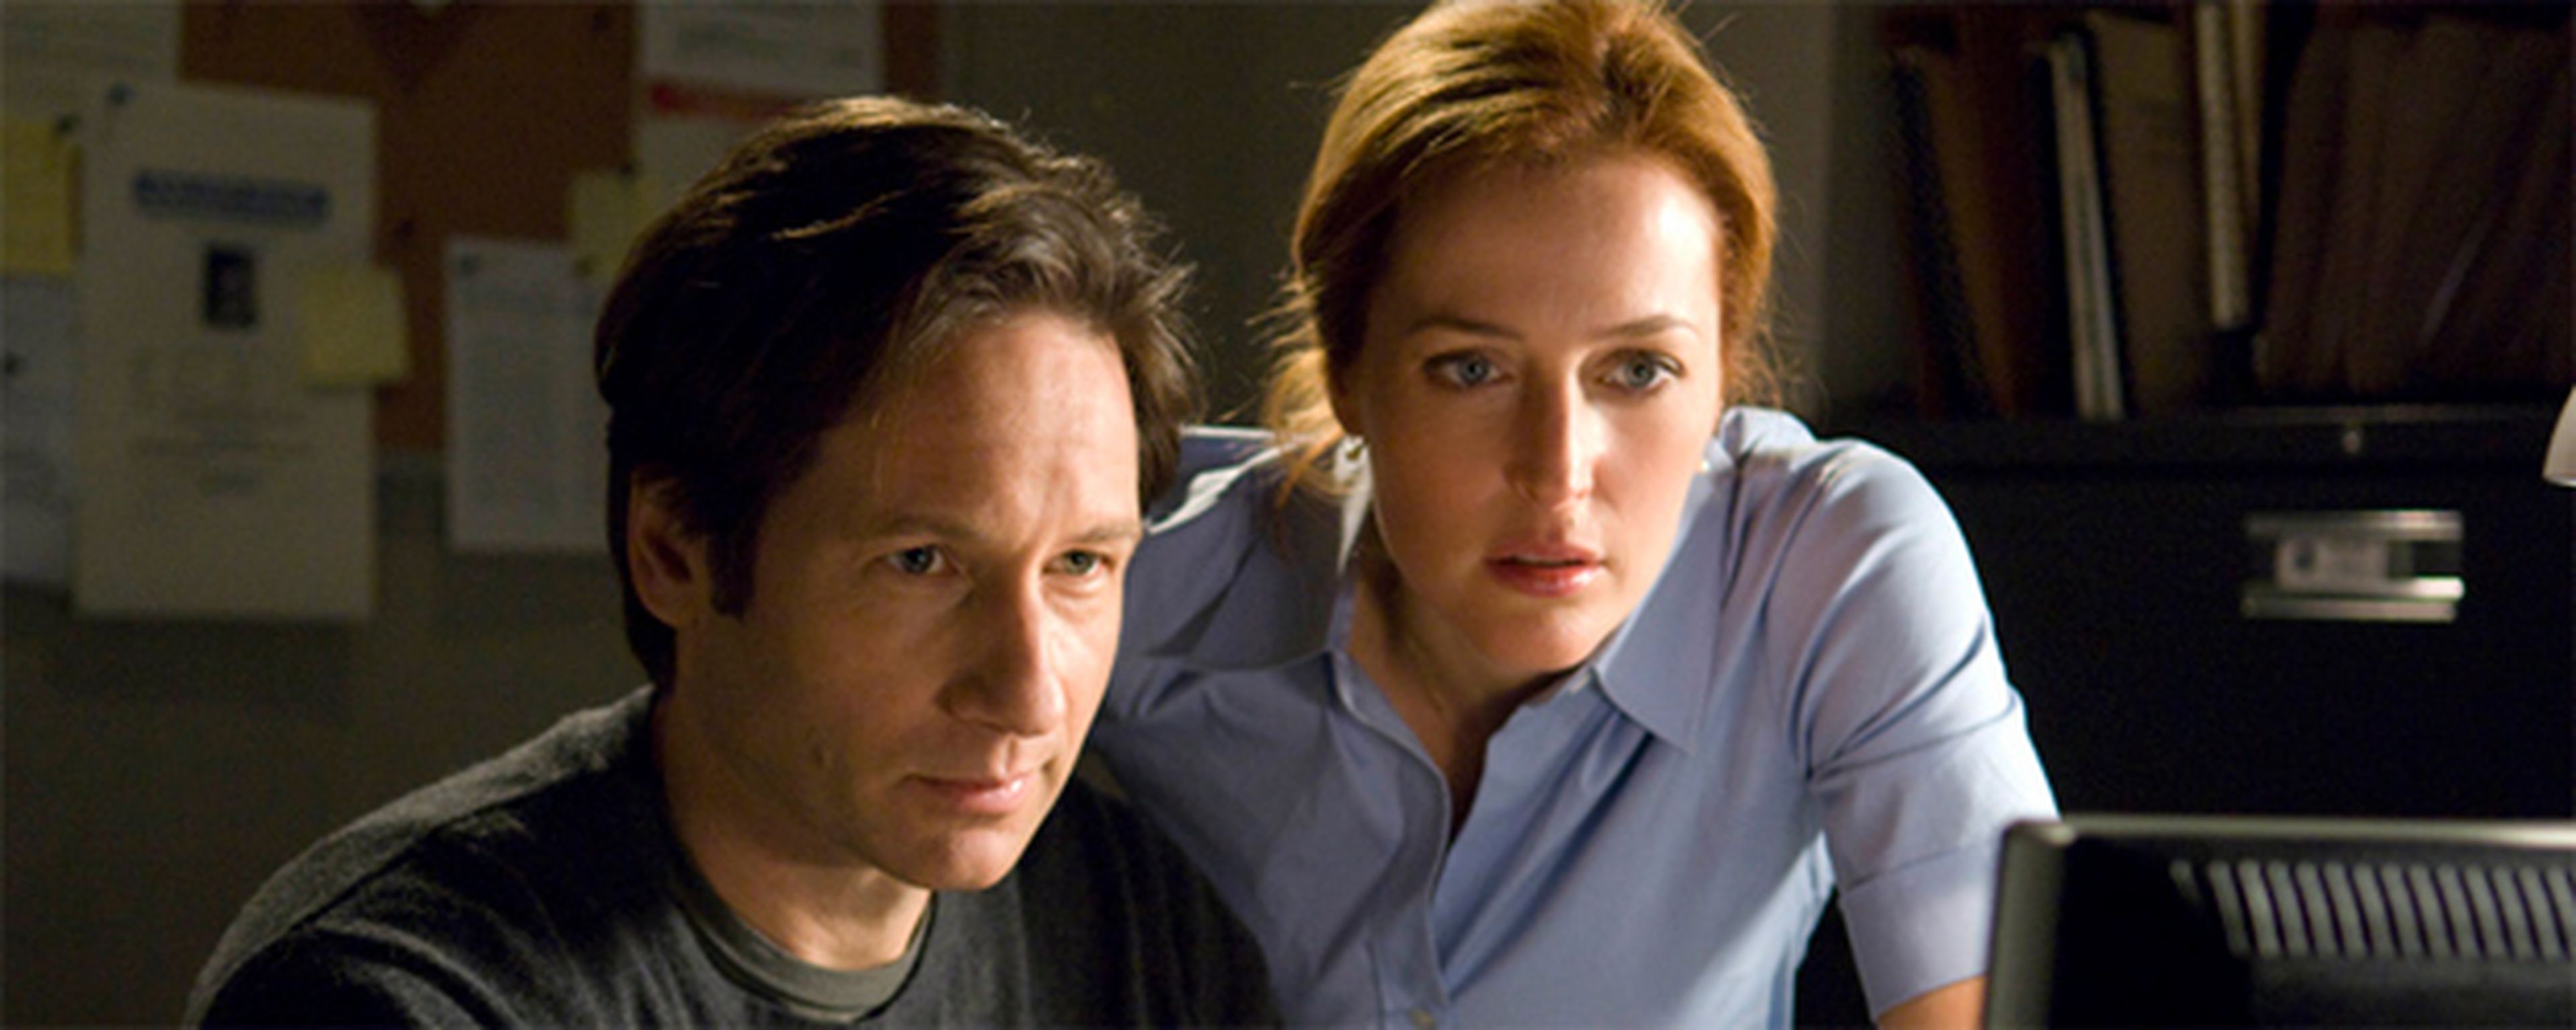 Mulder Scully Expediente X 10